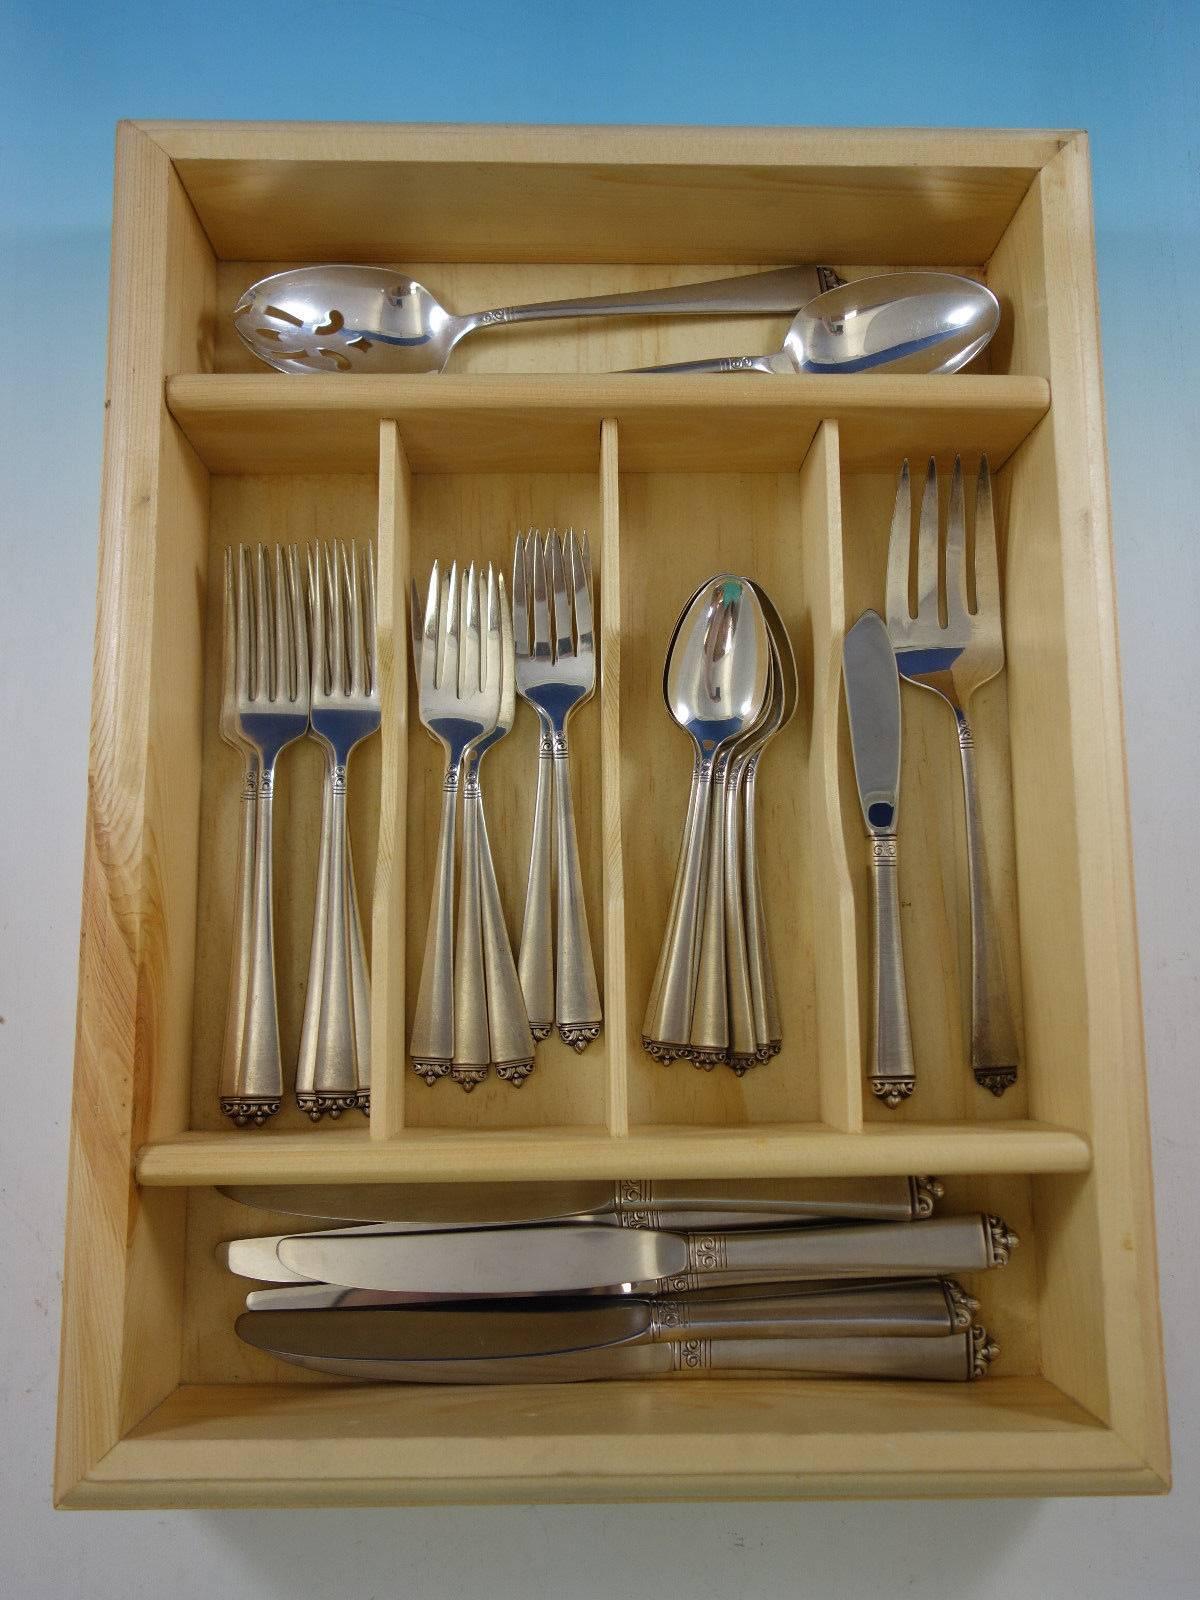 Satin Beauty by Oneida sterling silver flatware set with satin finish of 28 pieces. Great starter set! This set includes: 

Six knives, 8 7/8